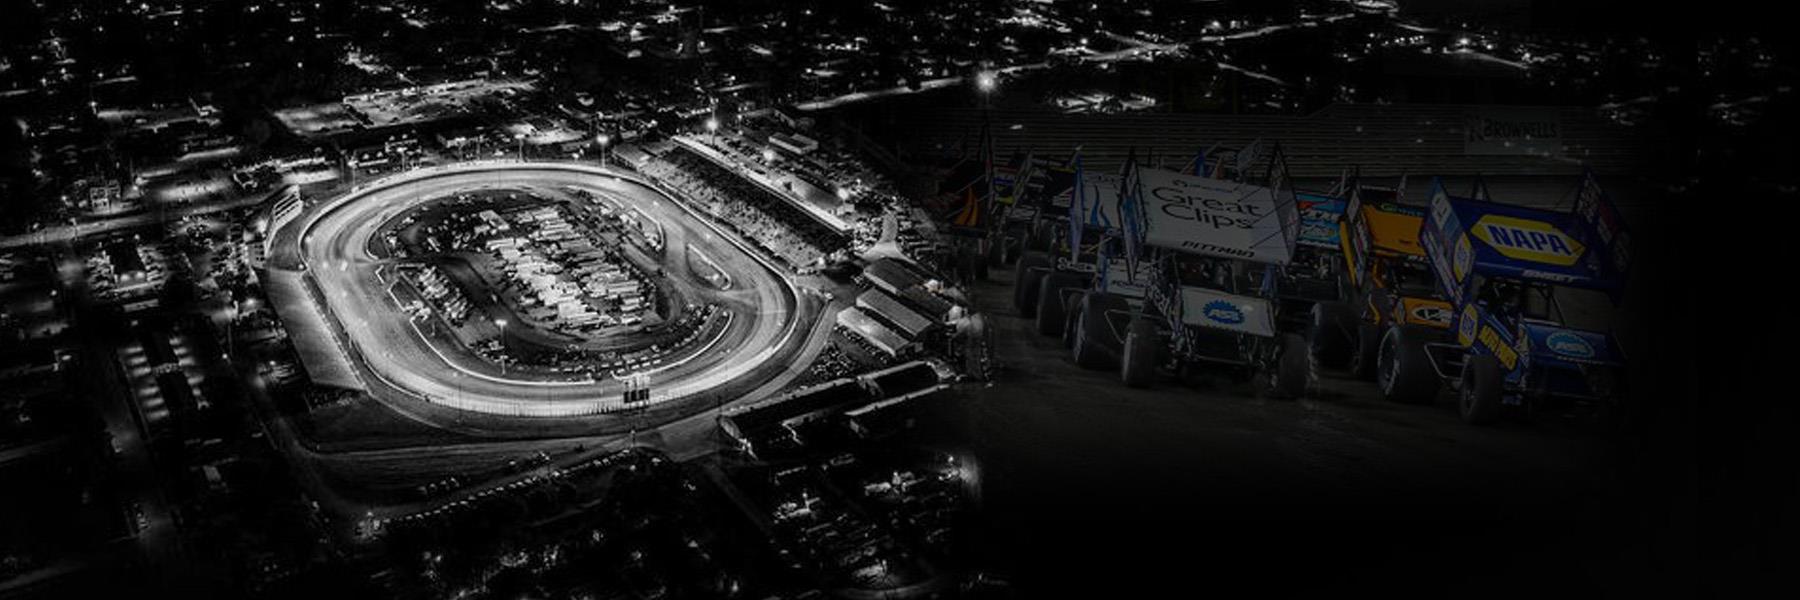 8/7/2022 - Knoxville Raceway